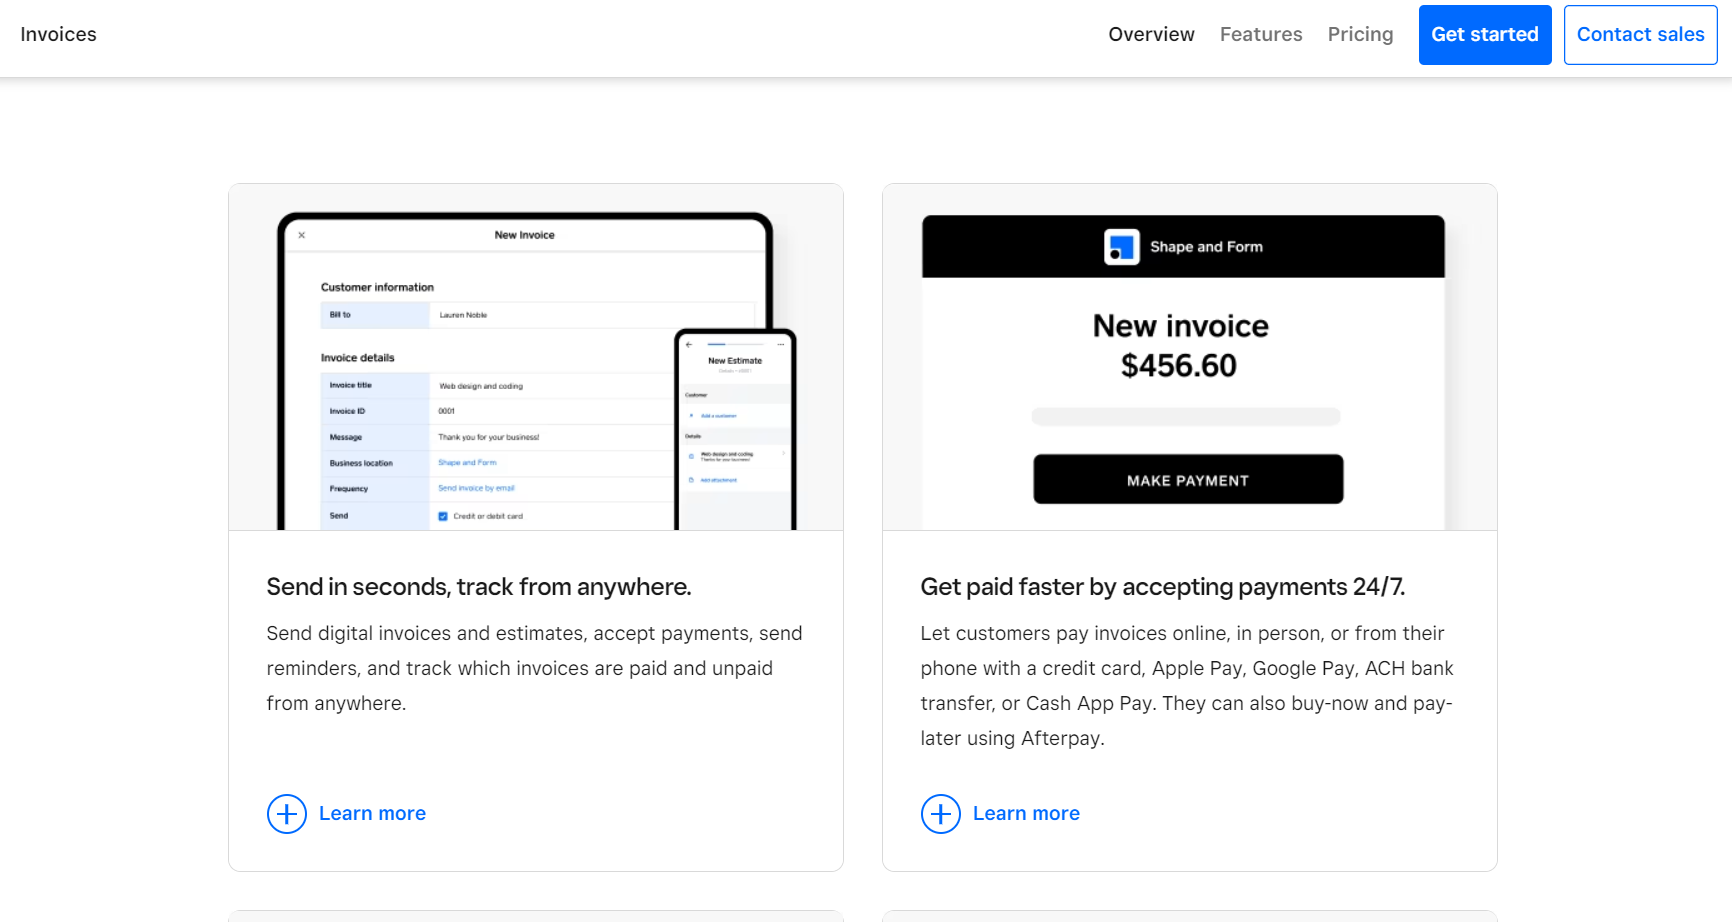 Square Invoices Review: What Does Square Invoices Offer